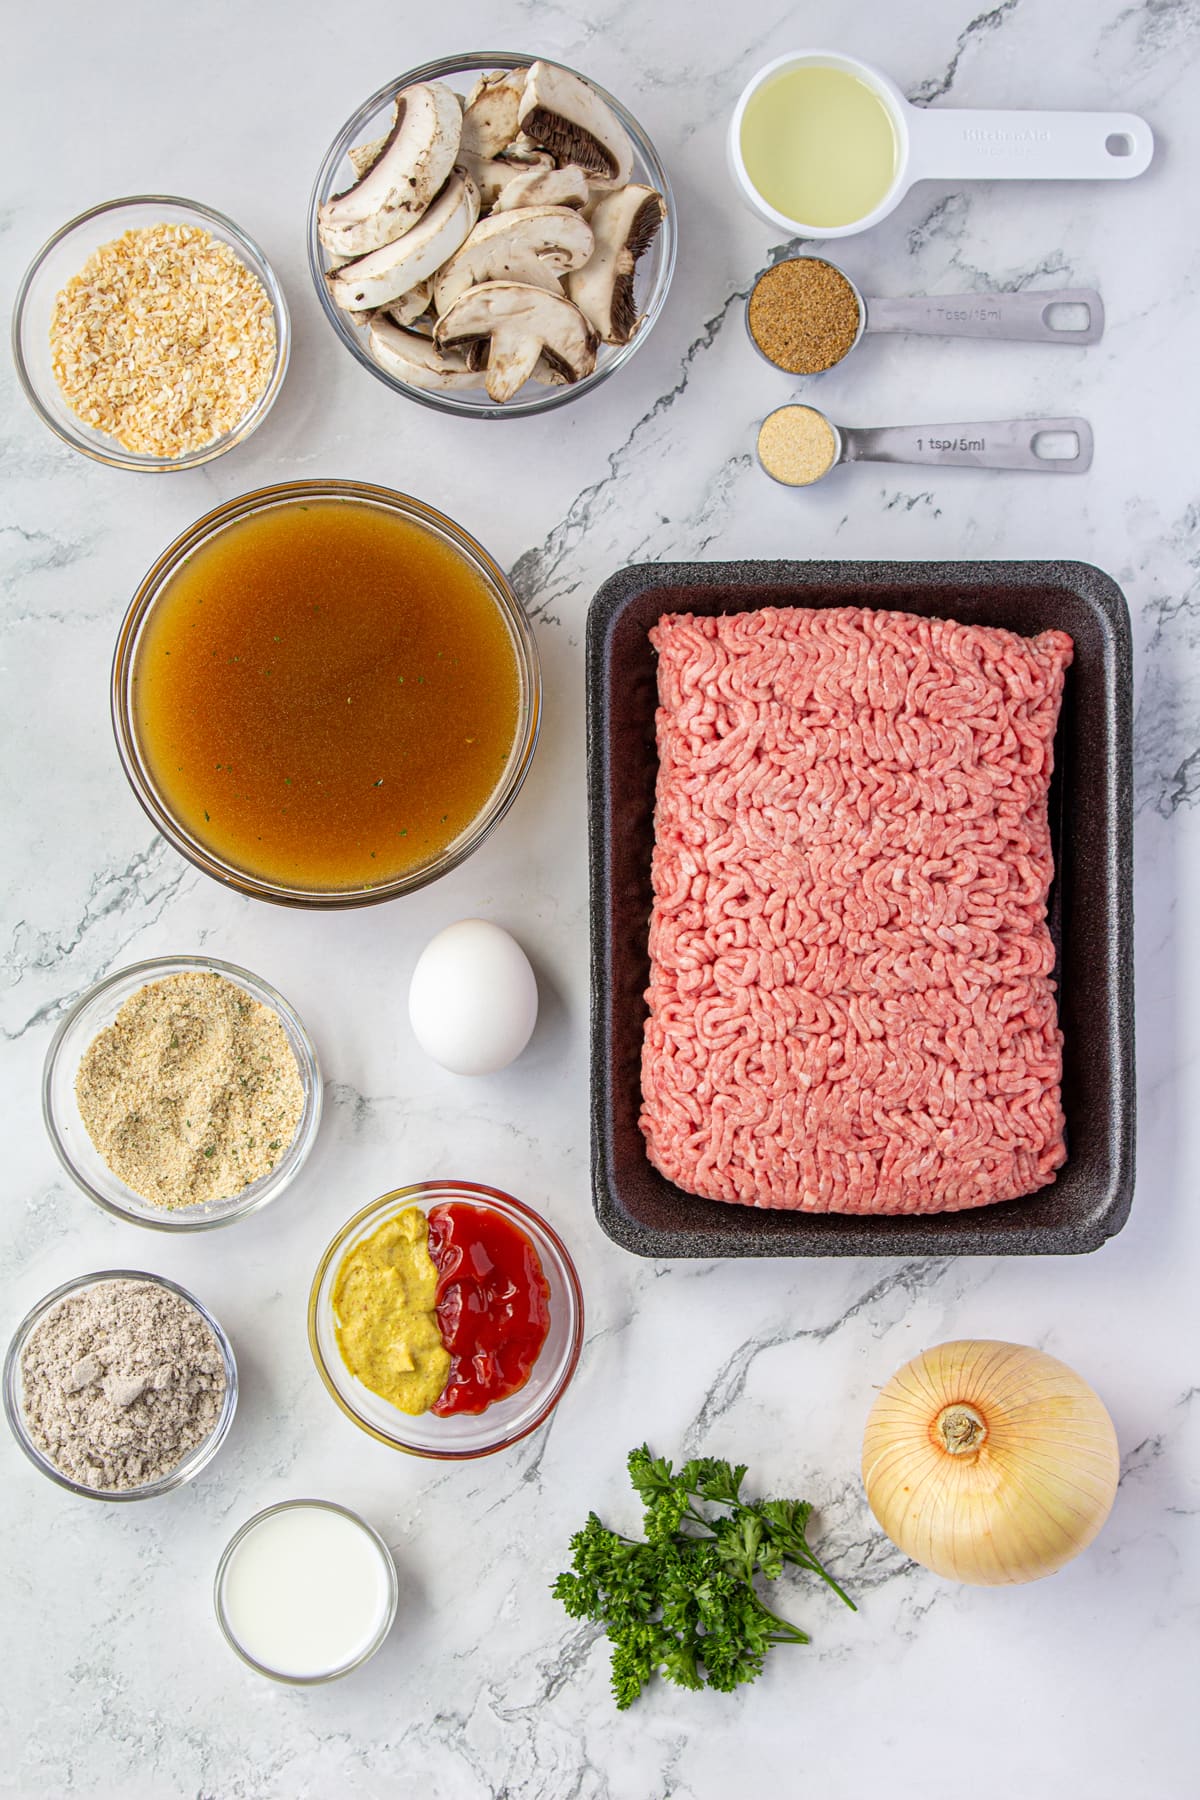 All the ingredients for Hamburger Steak and mushroom gravy laid out on the counter.